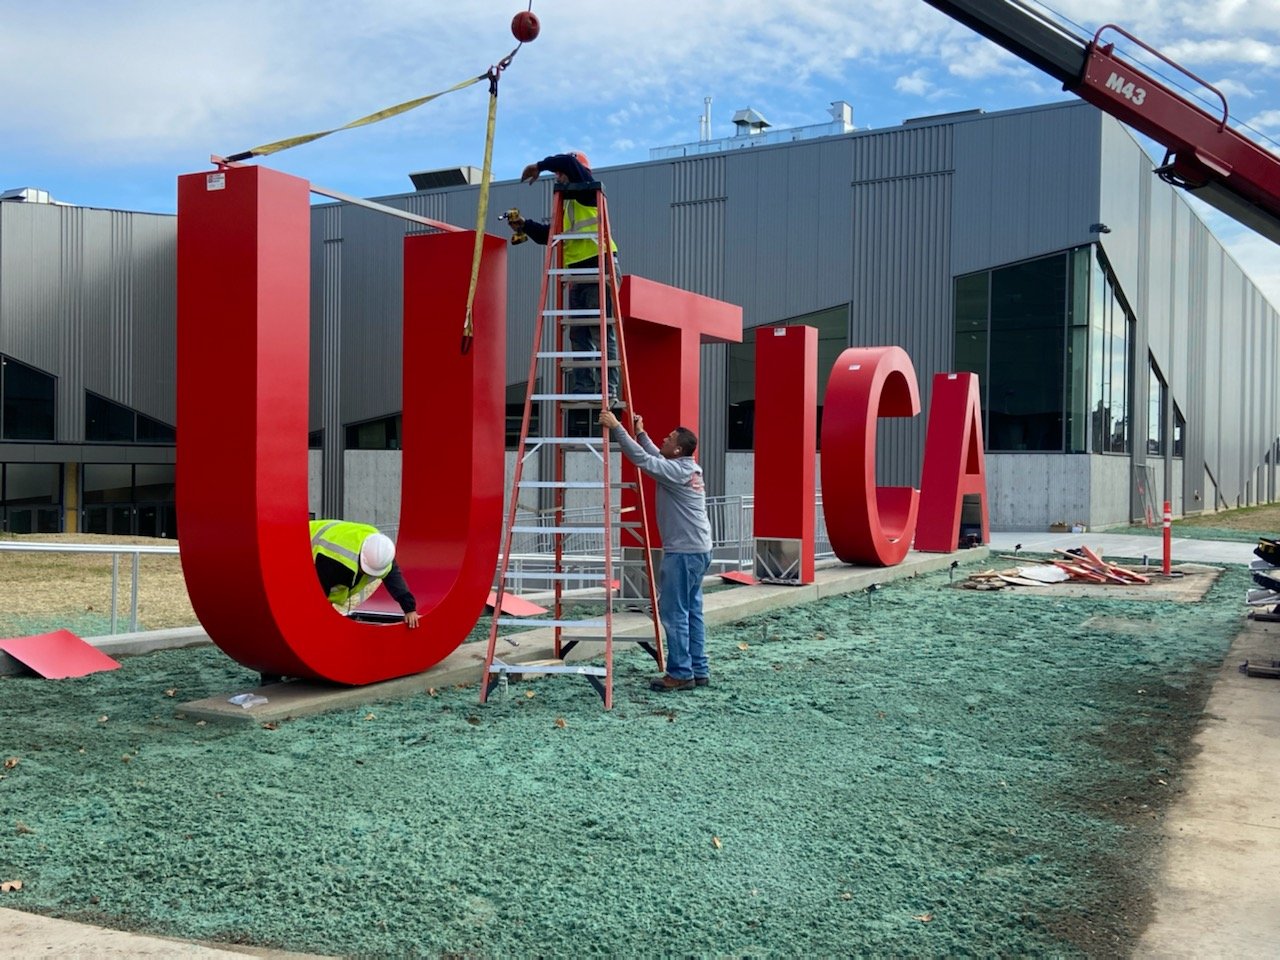 A crew puts the finishing touches on the letter “U” in a Utica sign as it is set to be hoisted into place at the Nexus Center facility in Utica.  Officials say the new multisport facility in downtown Utica is set to begin gameplay on Wednesday, Nov. 9.